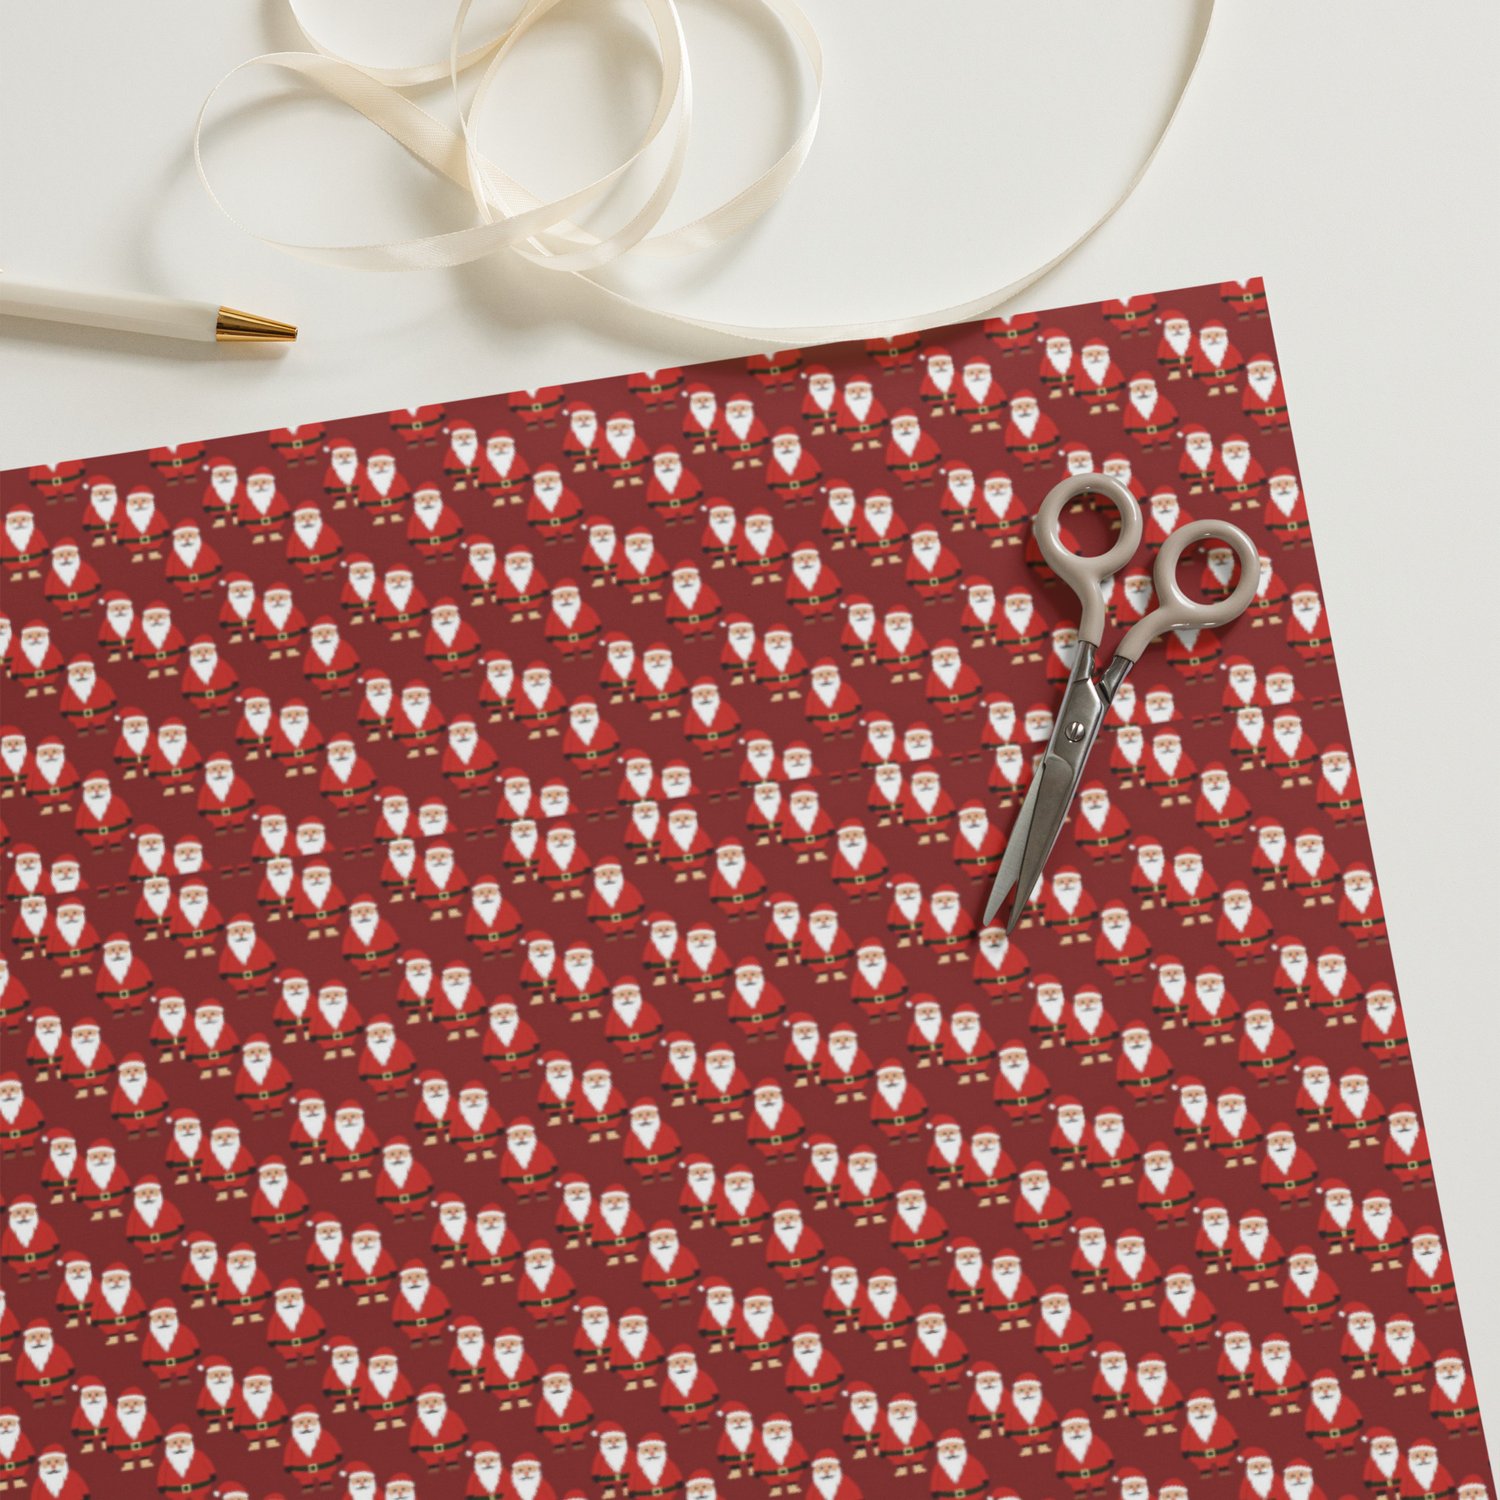 Wrapping Paper Sheets (3)